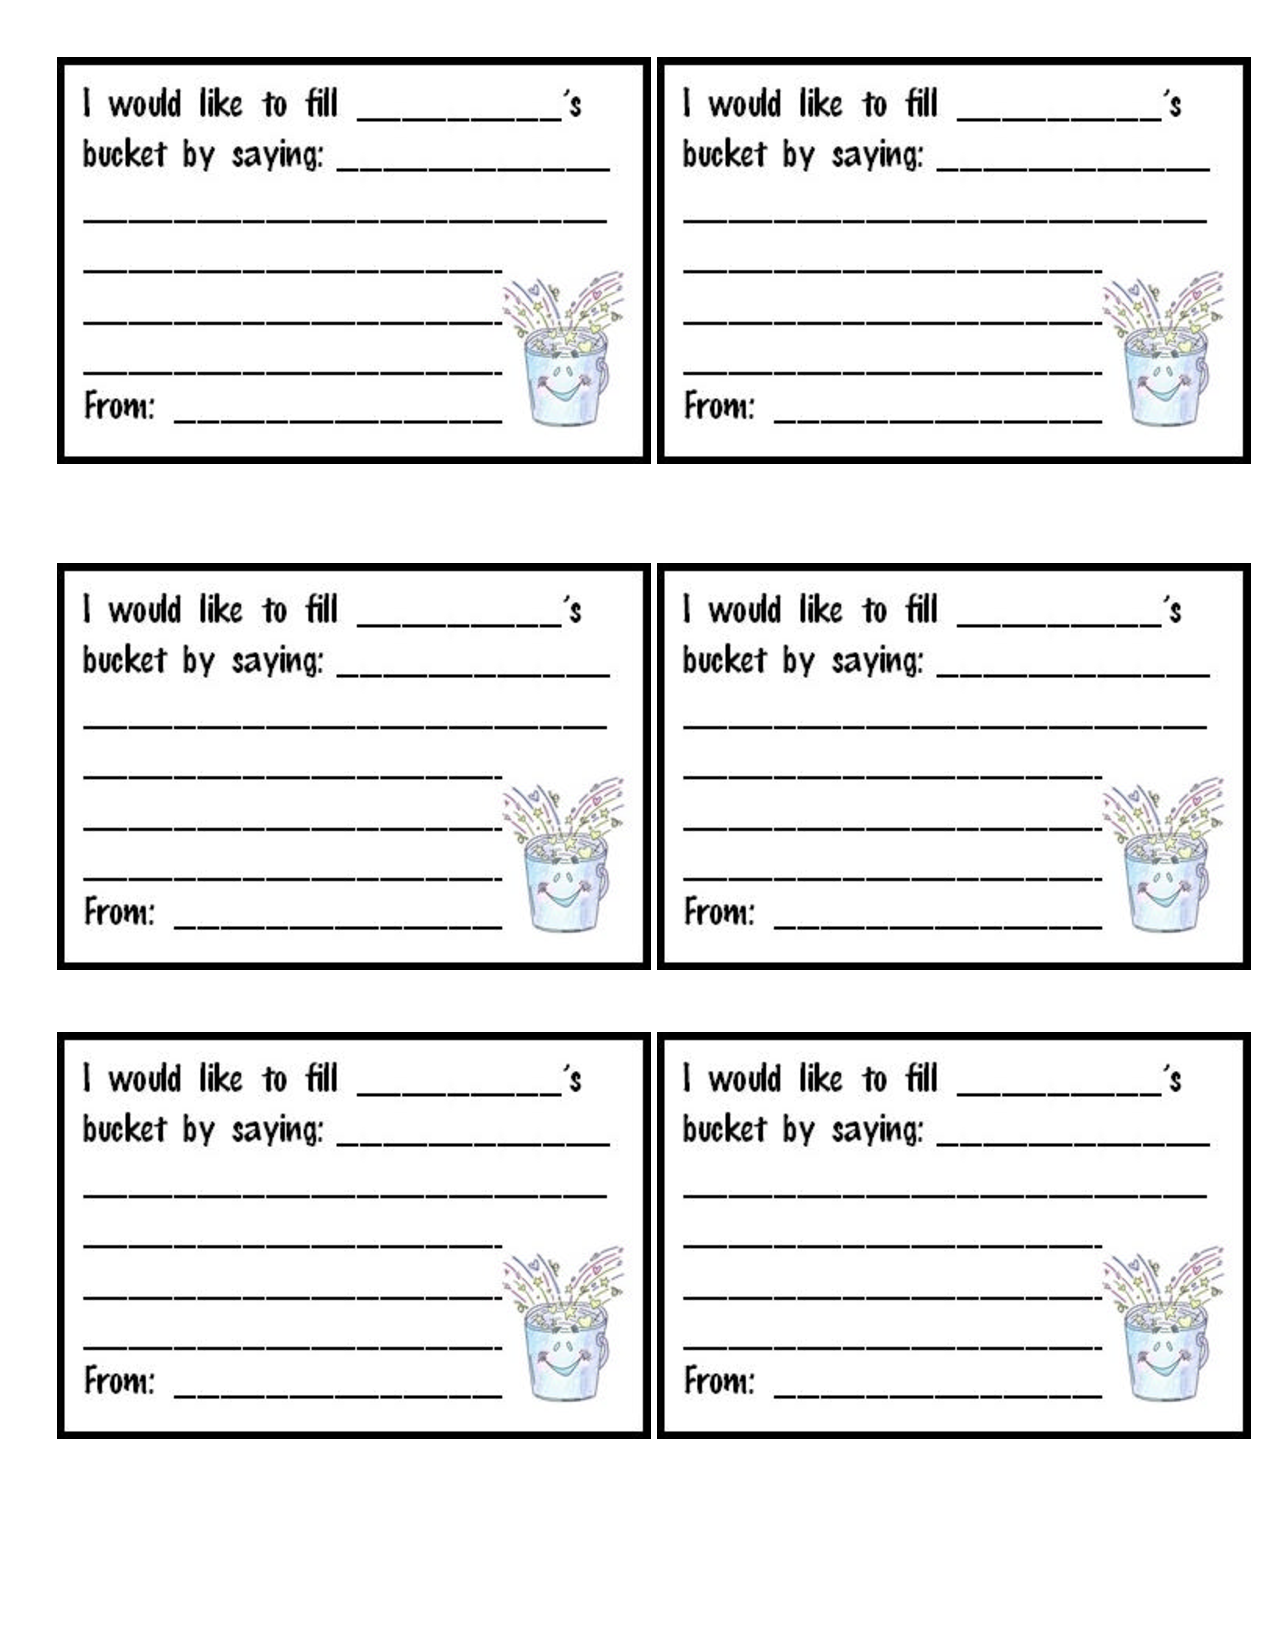 printable-bucket-filler-forms-printable-forms-free-online